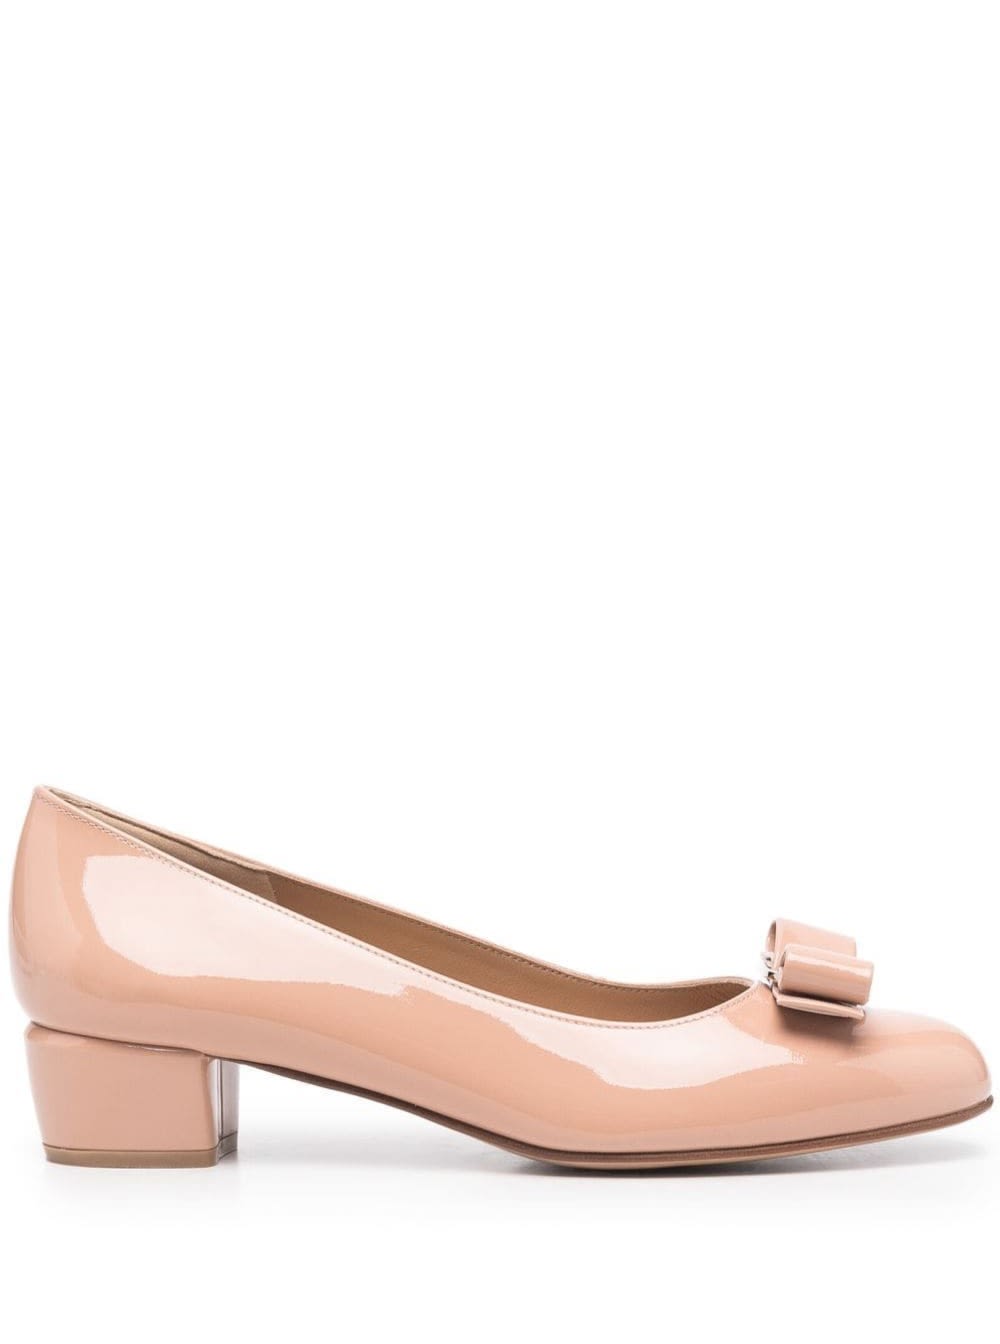 FERRAGAMO PINK VIVA PATENT FINISH BALLET FLATS WITH LOGO PLACQUE IN LEATHER WOMAN